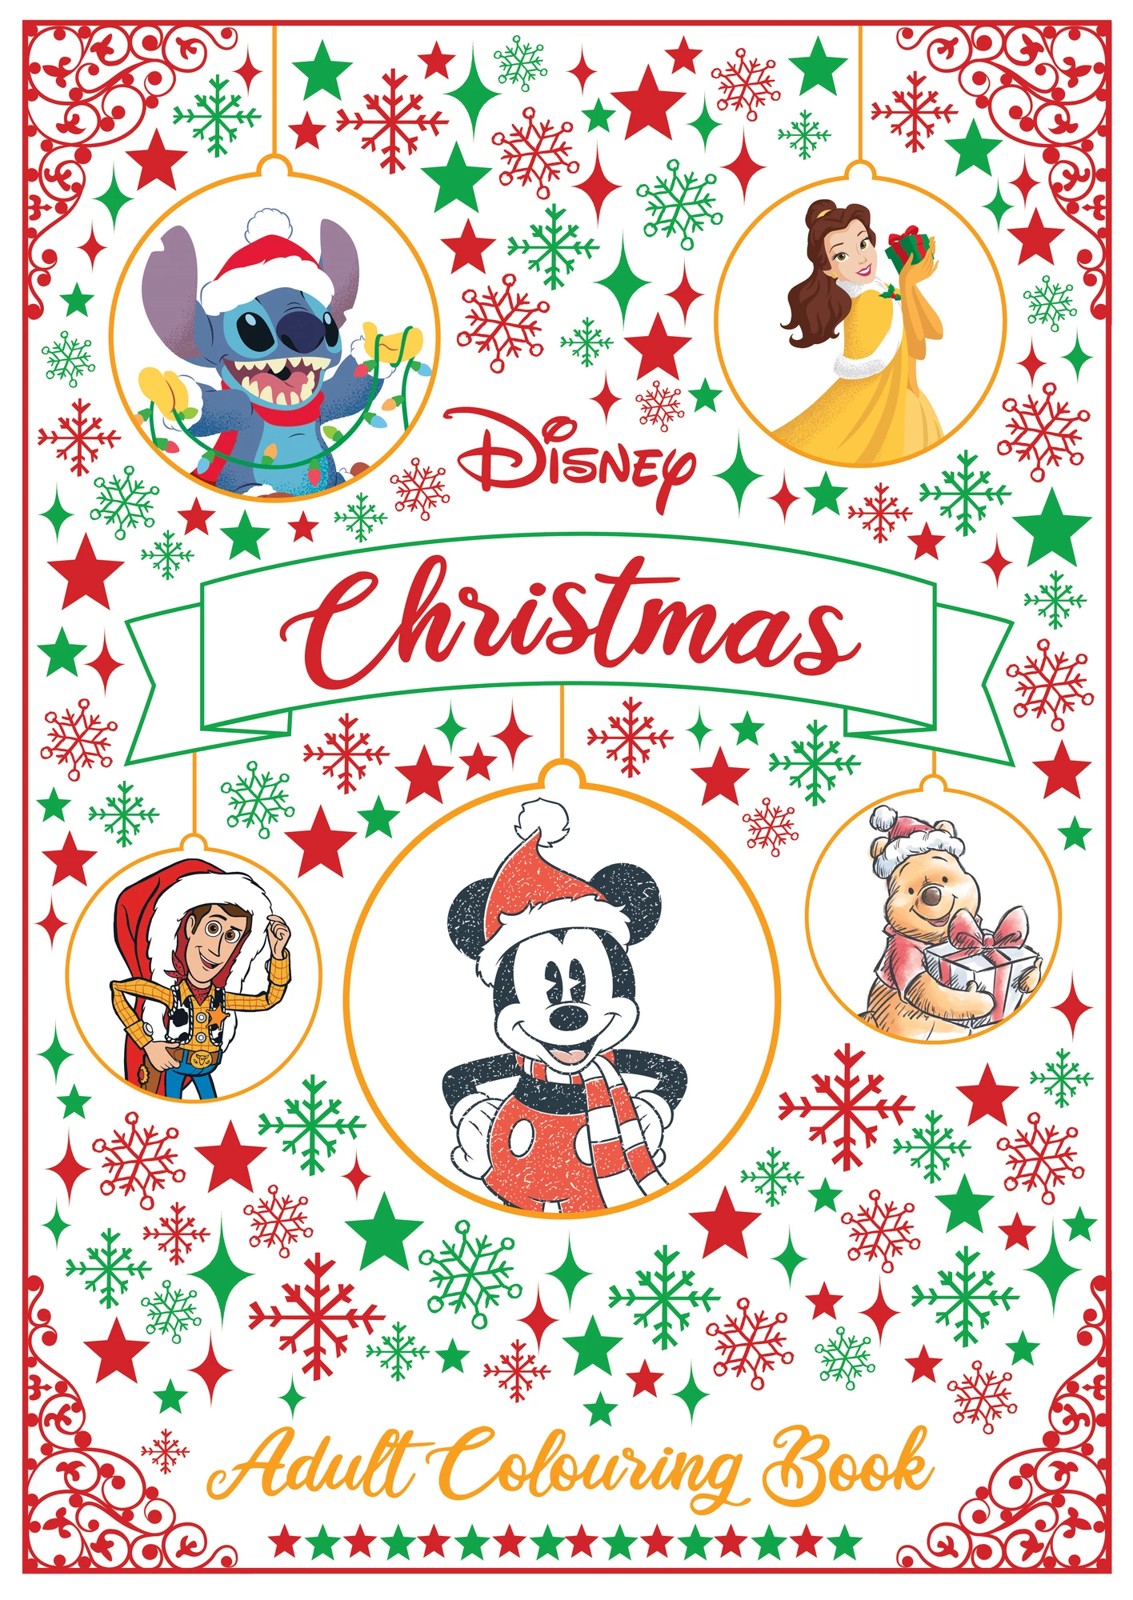 Disney Christmas: Adult Colouring Book